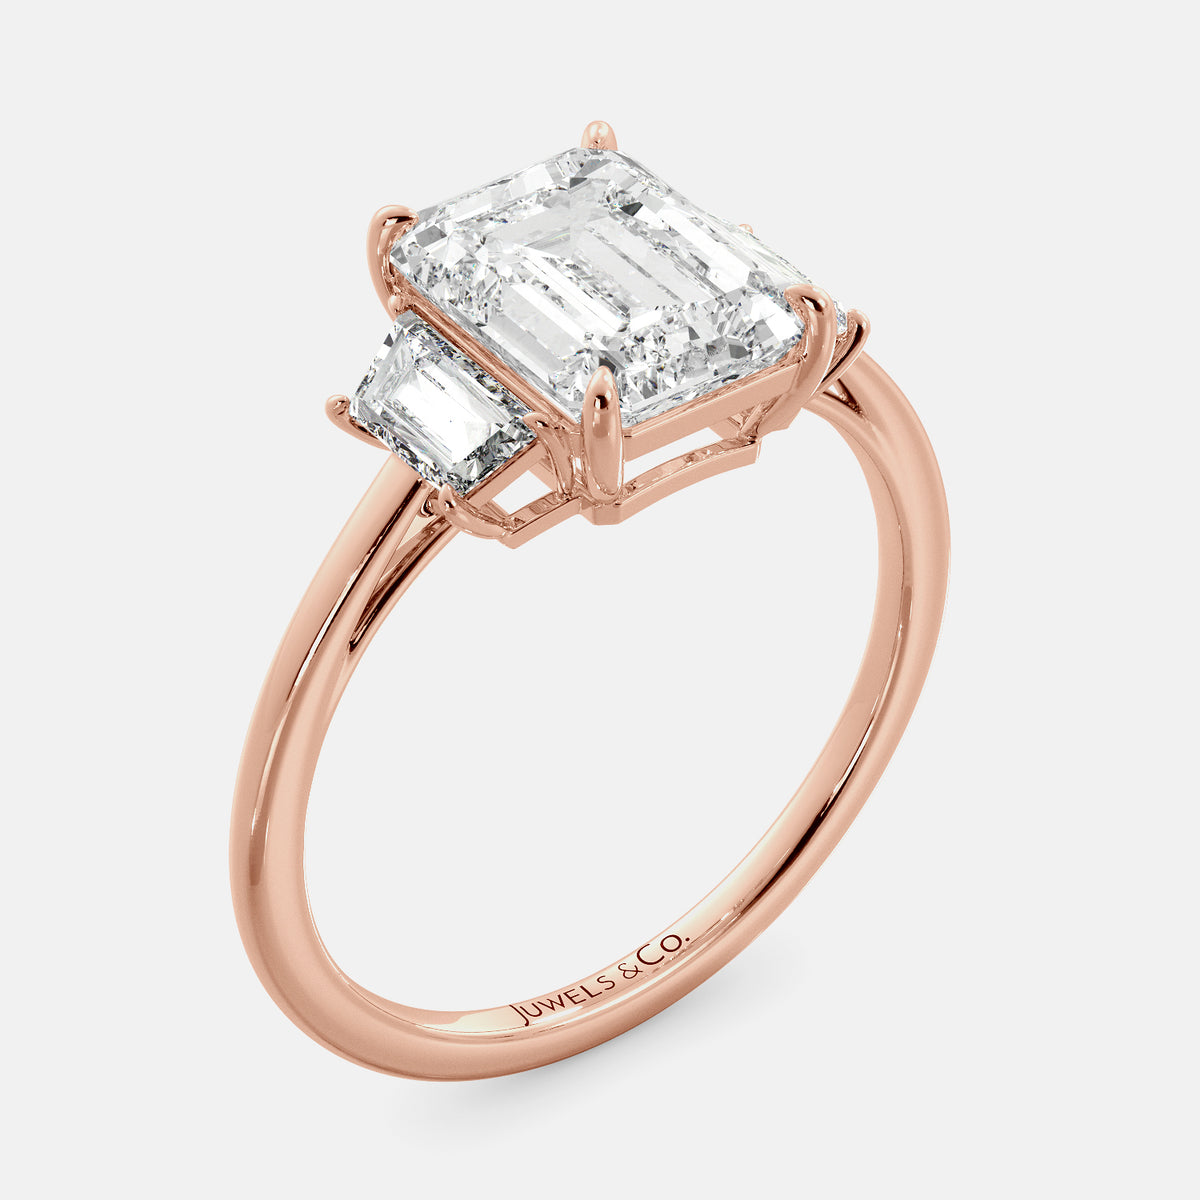 Lab-grown Emerald Cut Diamond Ring with side baguettes, rose gold 14K